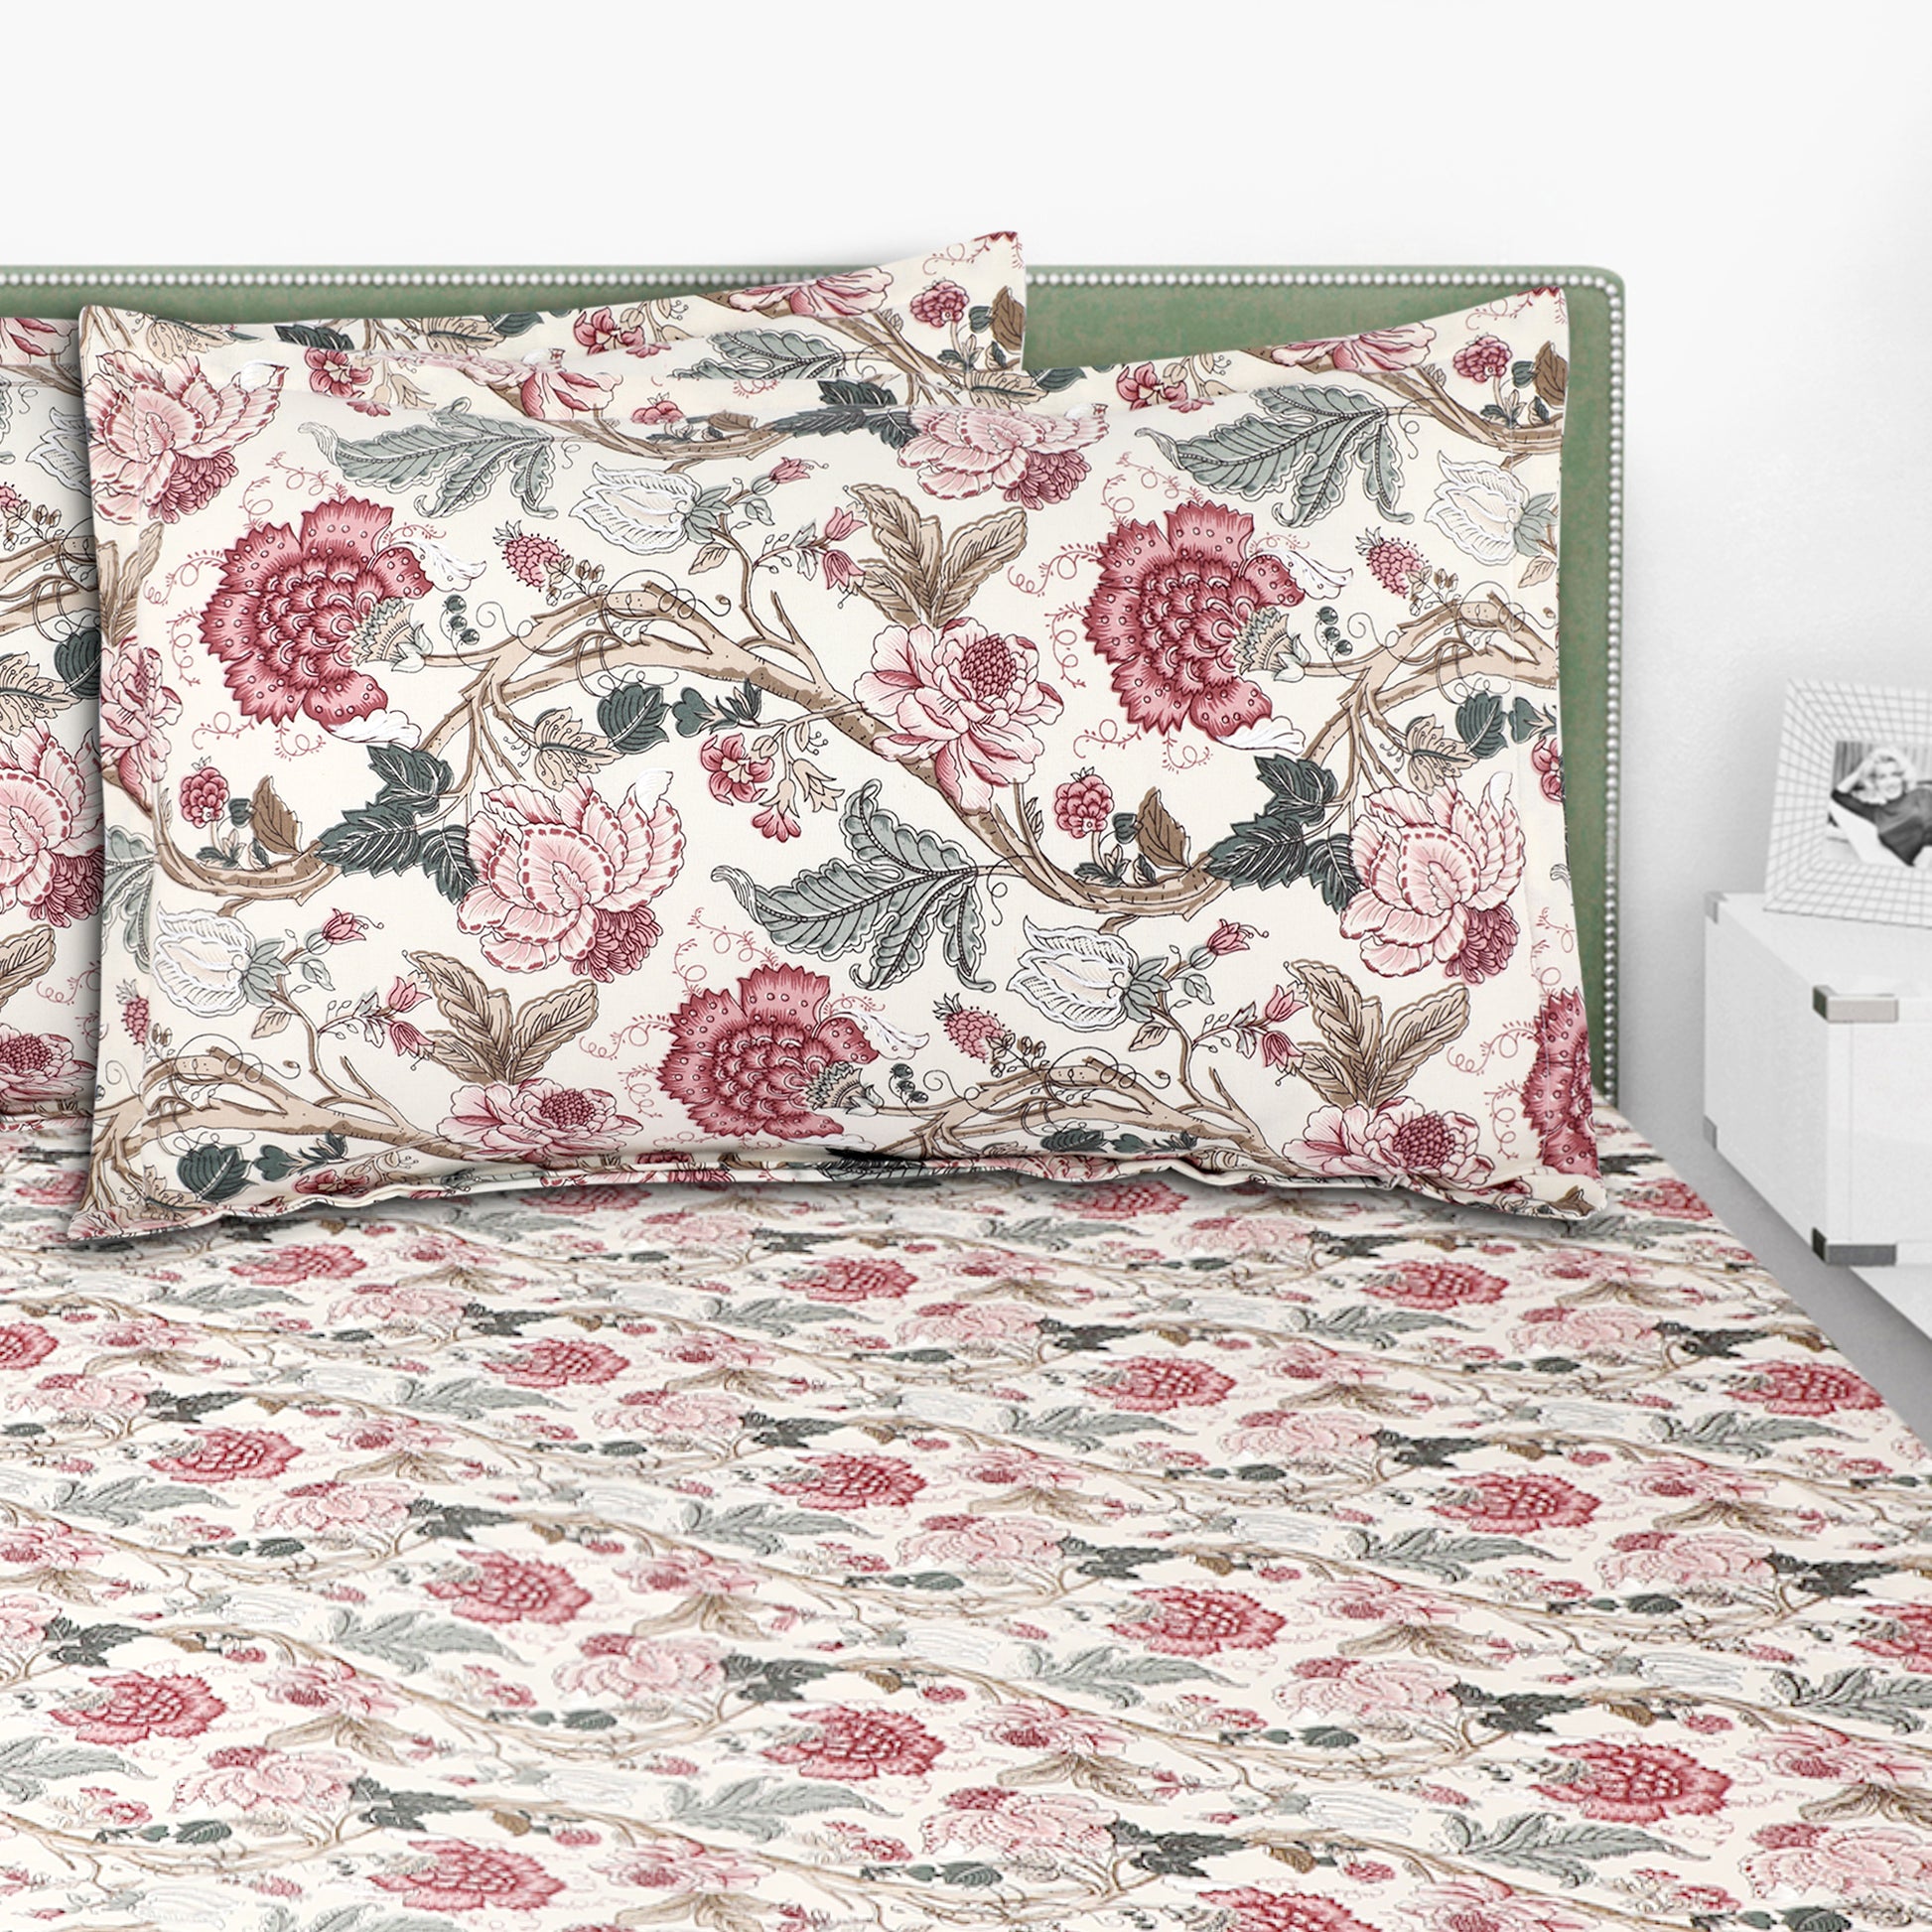 Fiza 100% Cotton Printed Cream & Red Dual Sided Bedding Set